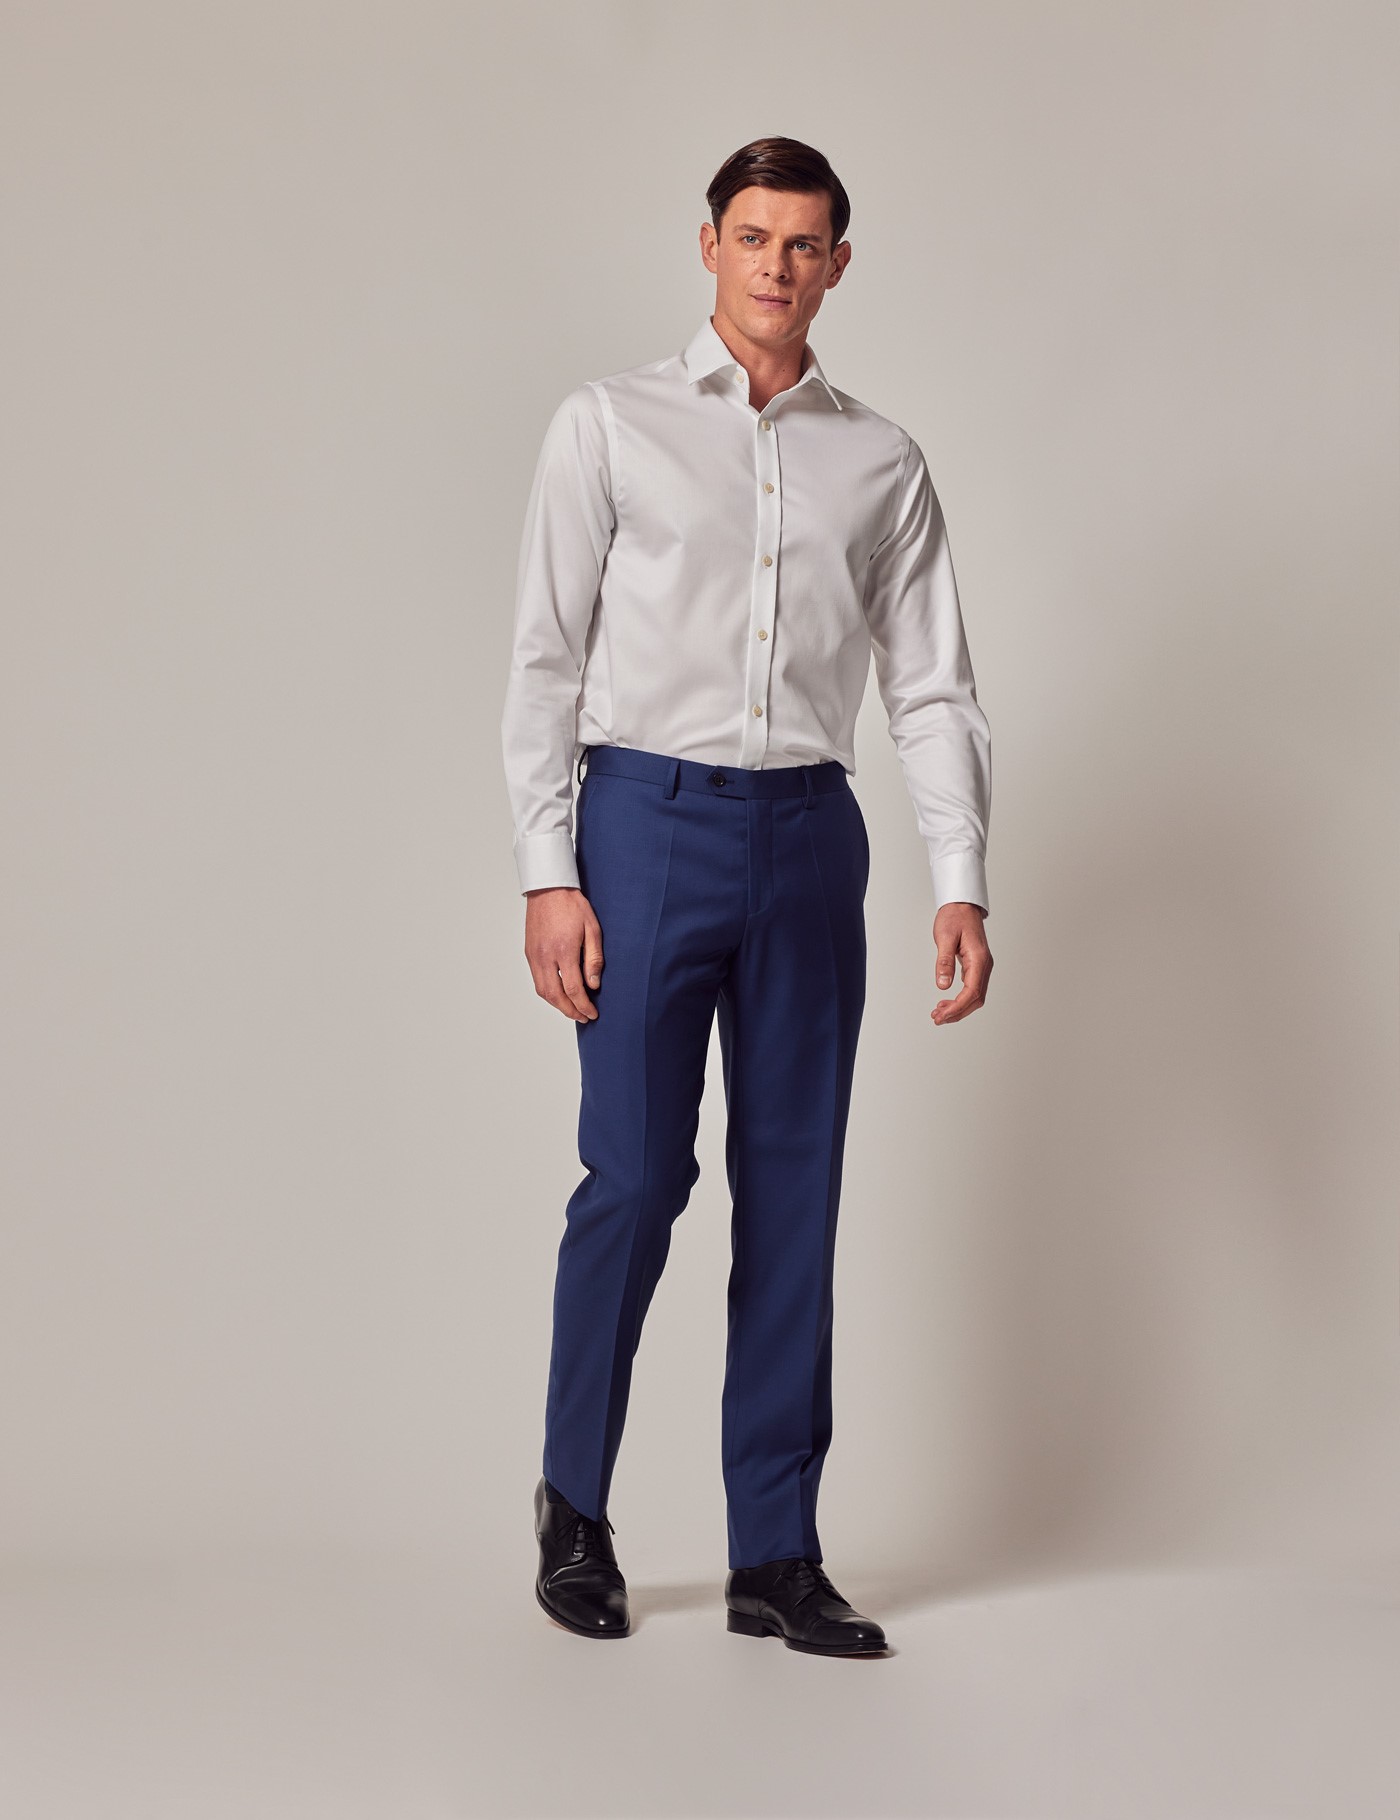 White Shirt With Blue Trouser Combination For Business Casual Look  Well  dressed men Mens outfits Classy men